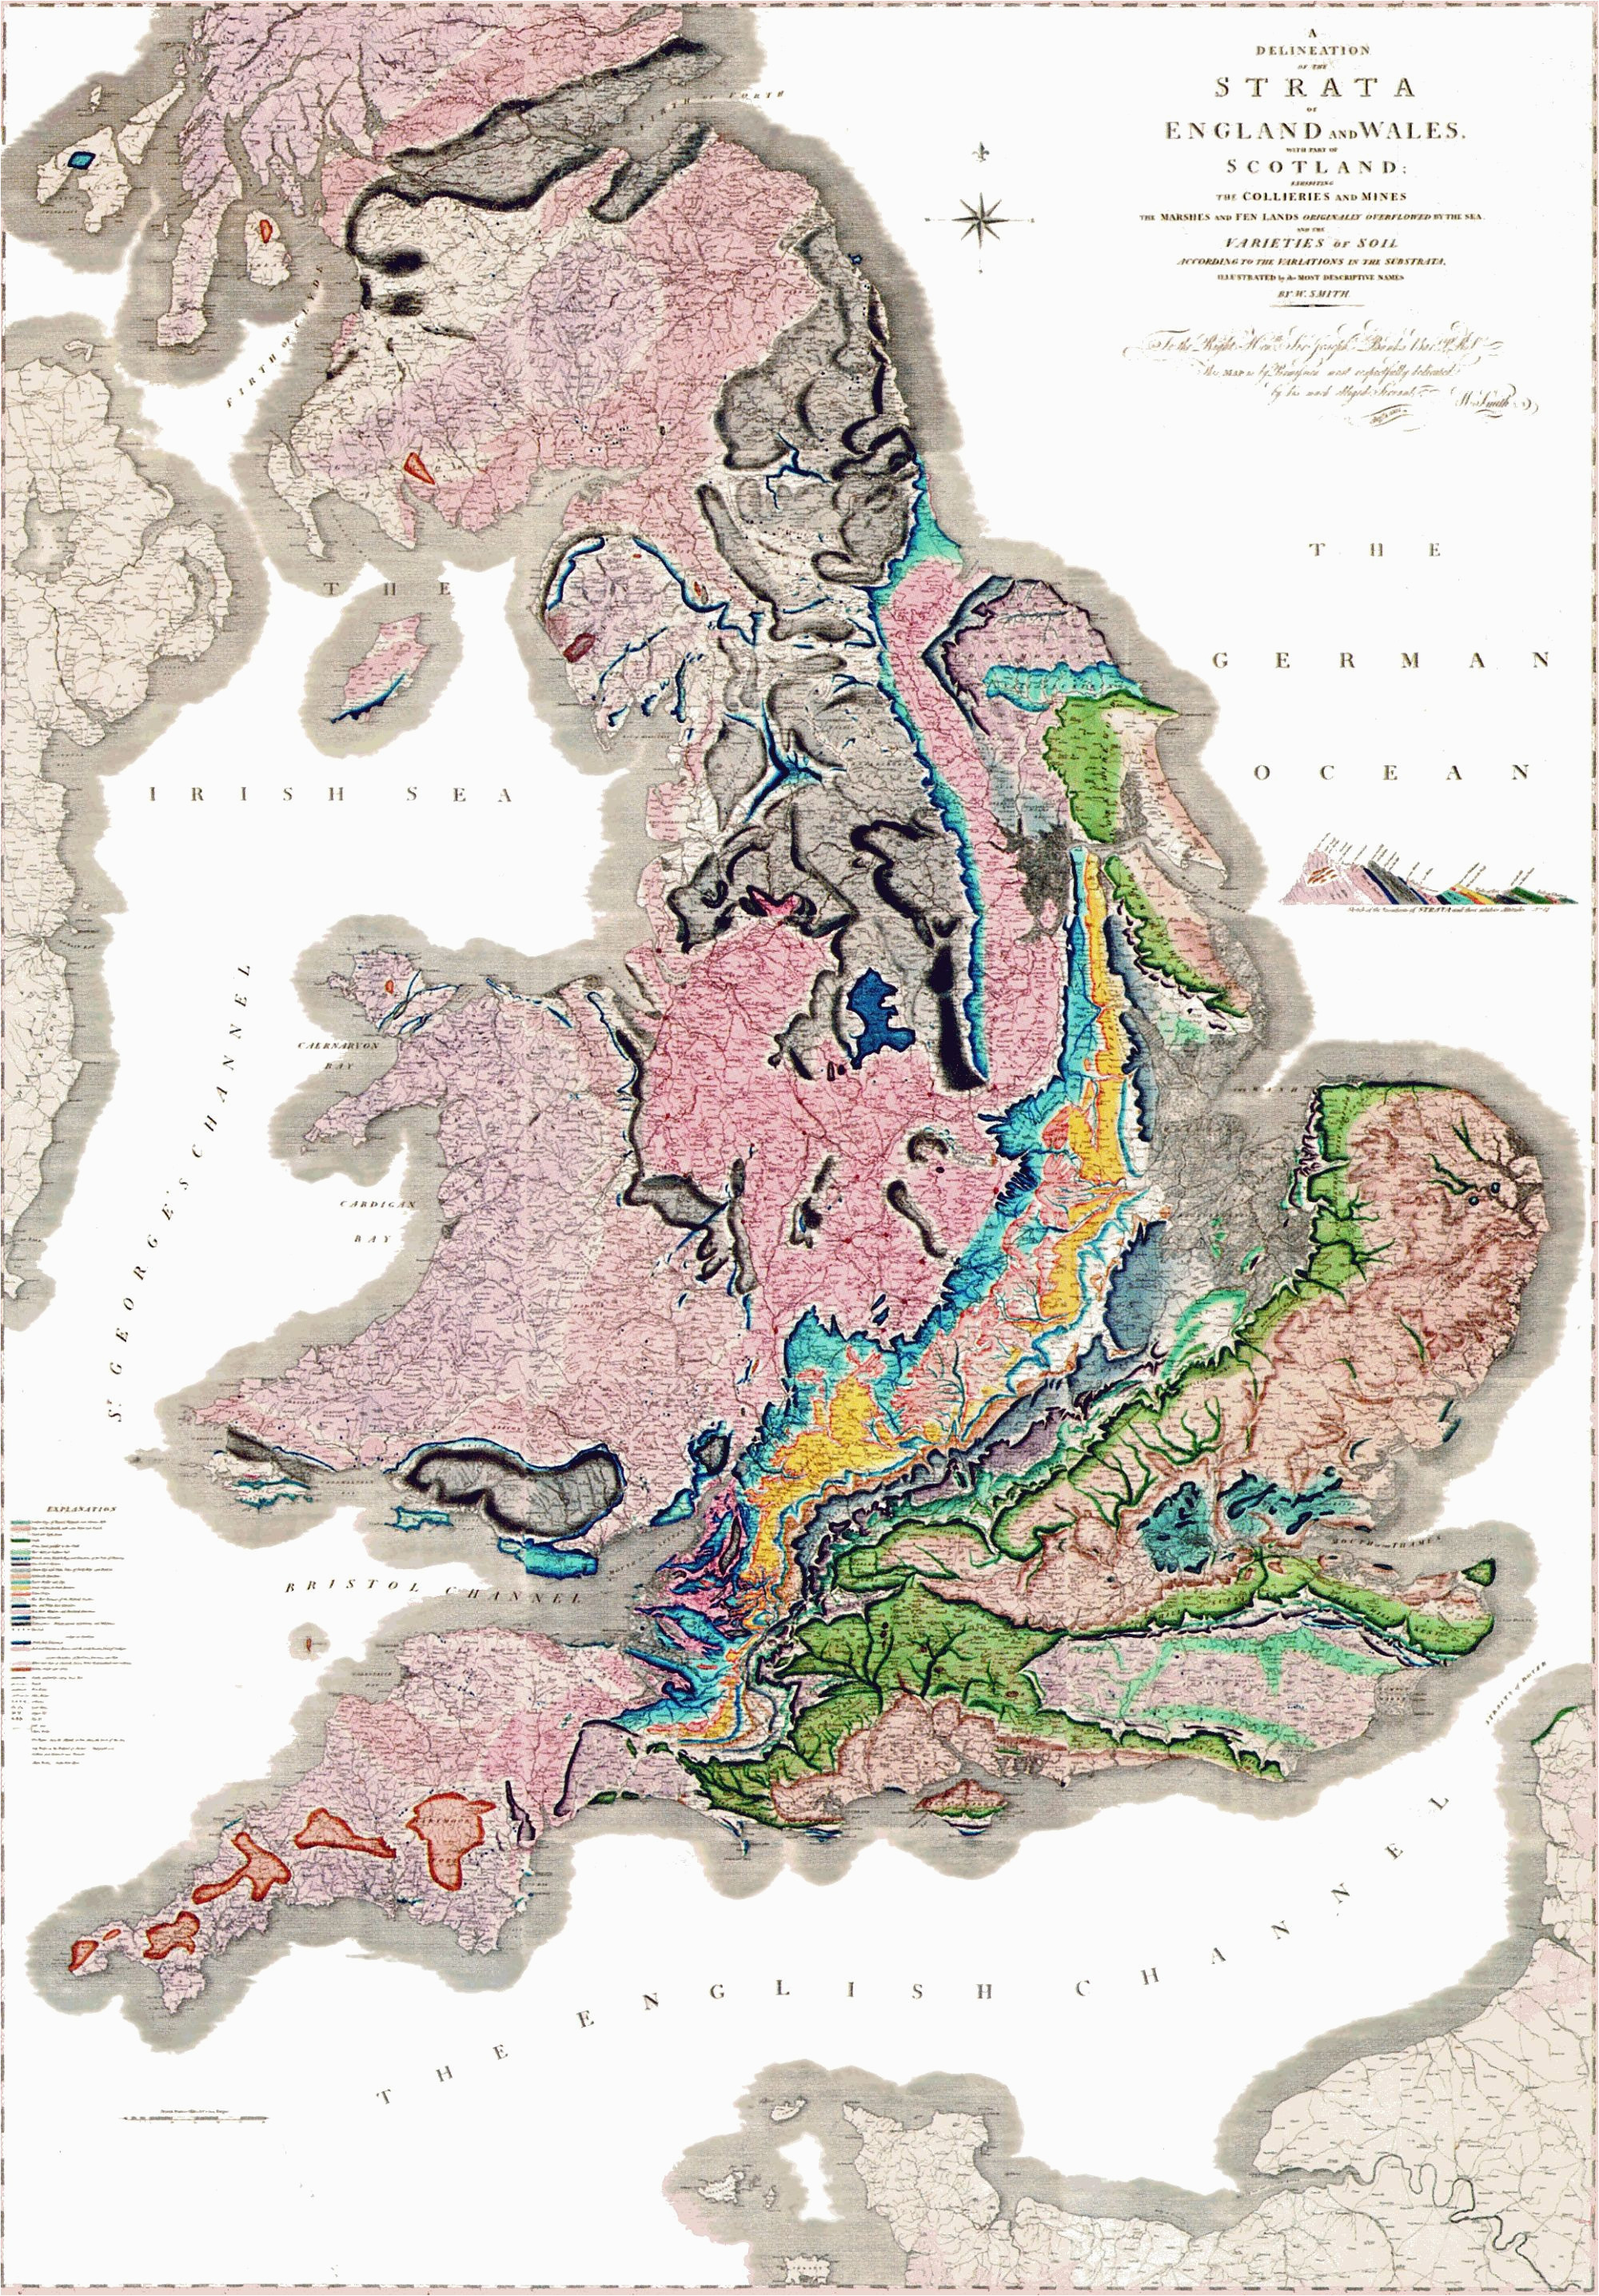 geological map of britain by william smith 1815 attractive